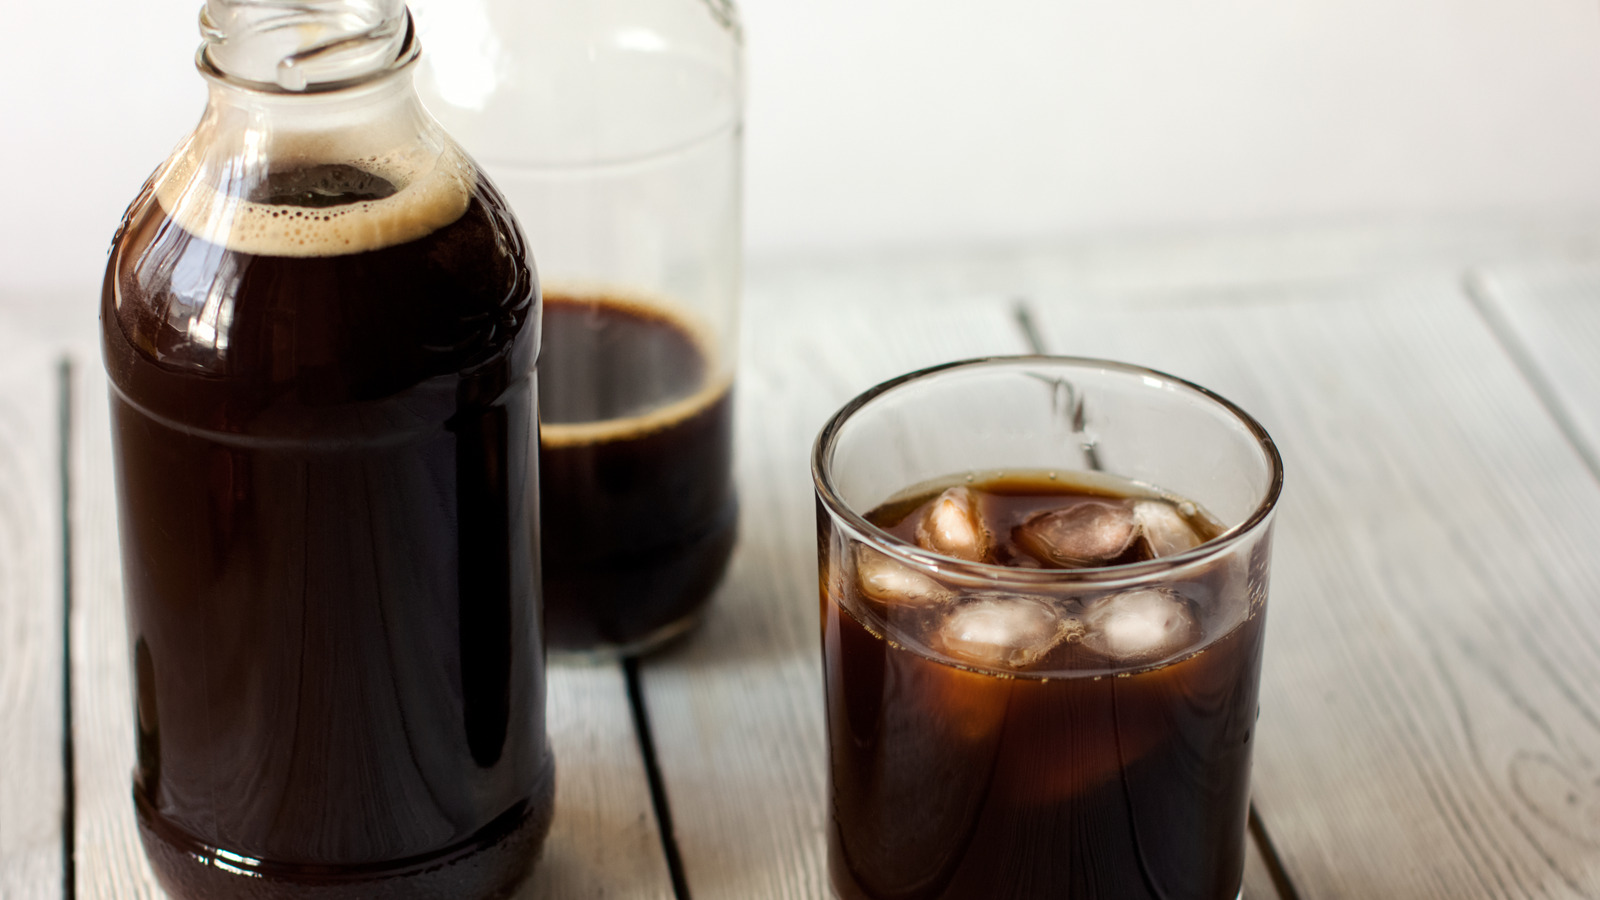 https://www.tastingtable.com/img/gallery/15-mistakes-youre-making-with-cold-brew-coffee/l-intro-1681764026.jpg